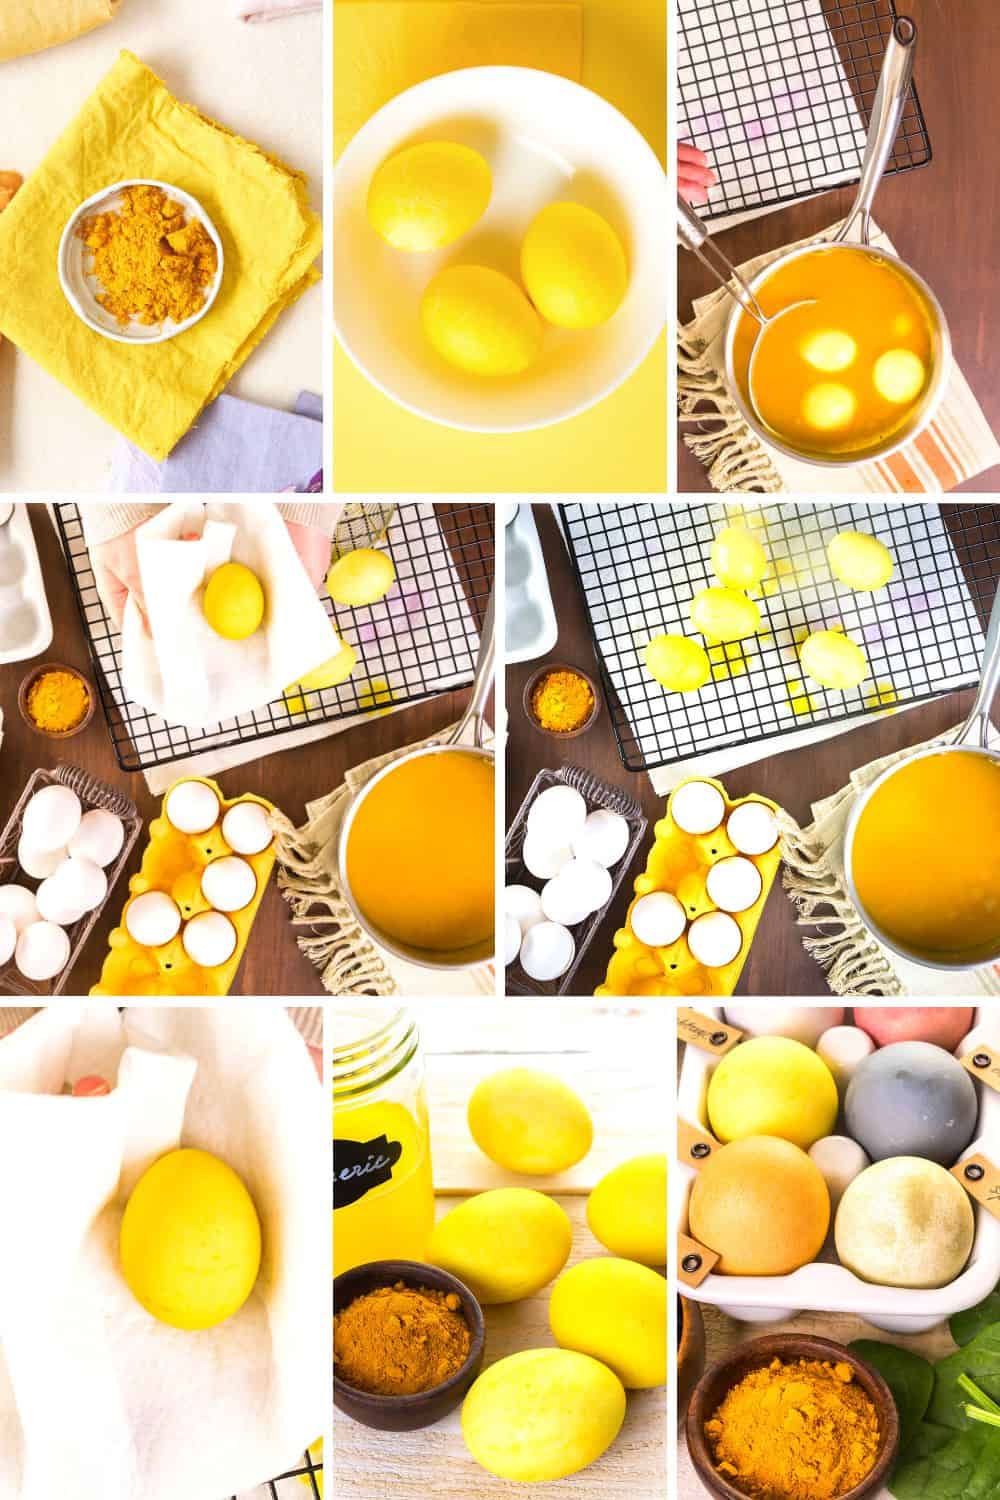 How To Naturally Dye Easter Eggs Step By Step (dying easter eggs with natural ingredients with turmeric yellow)